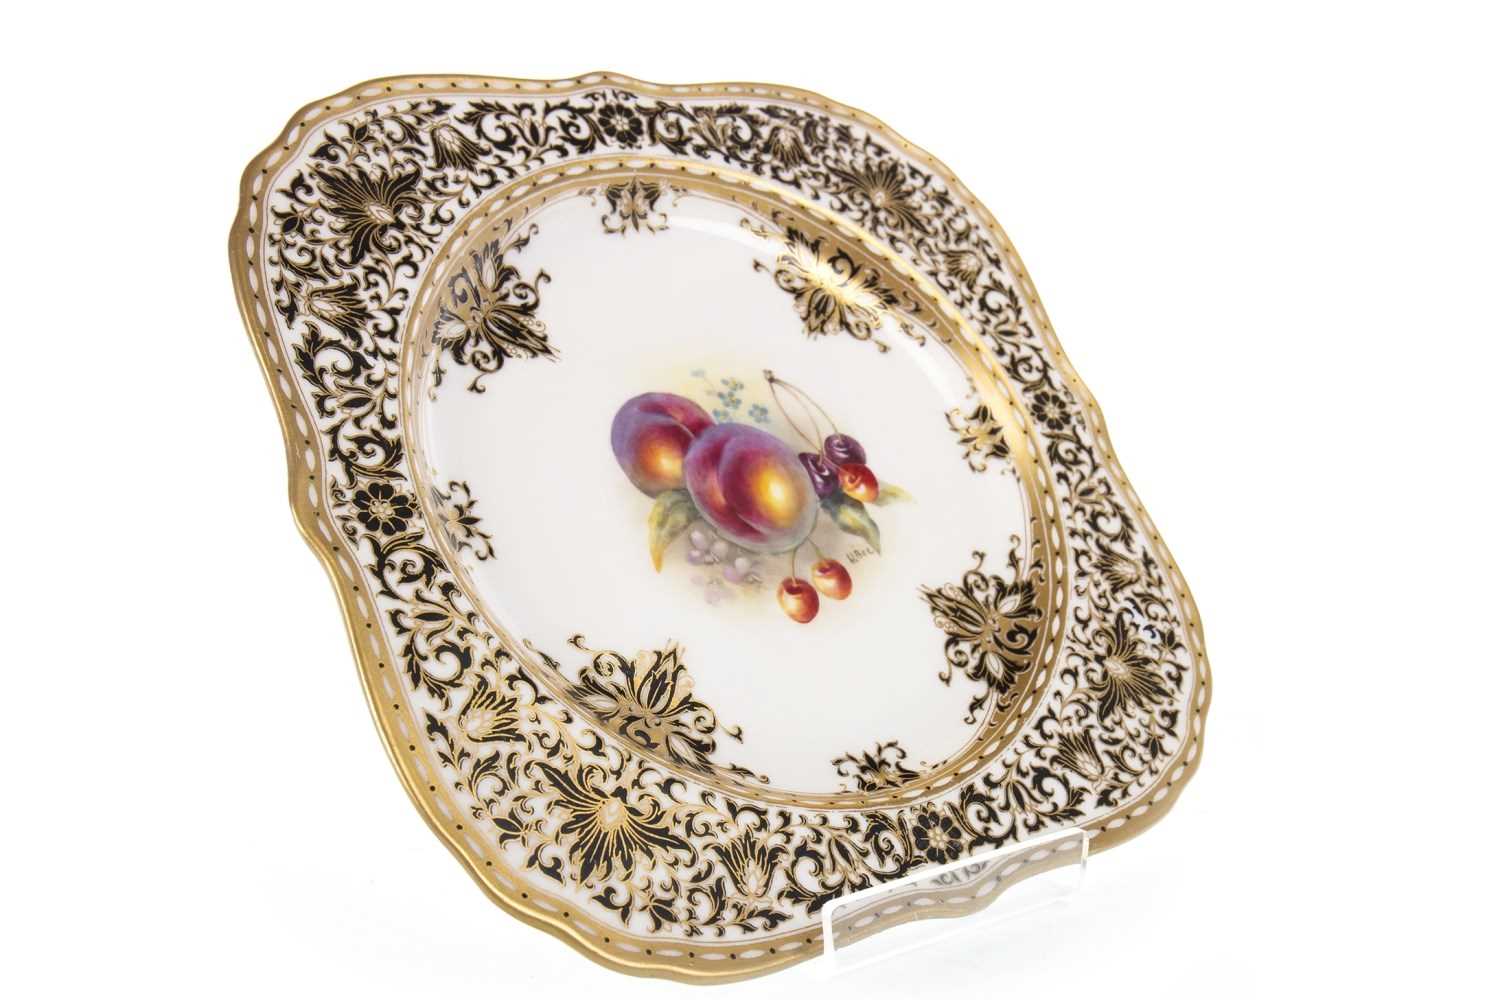 Lot 1228 - A SET OF FOUR ROYAL WORCESTER PLATES BY ALBERT SHUCK